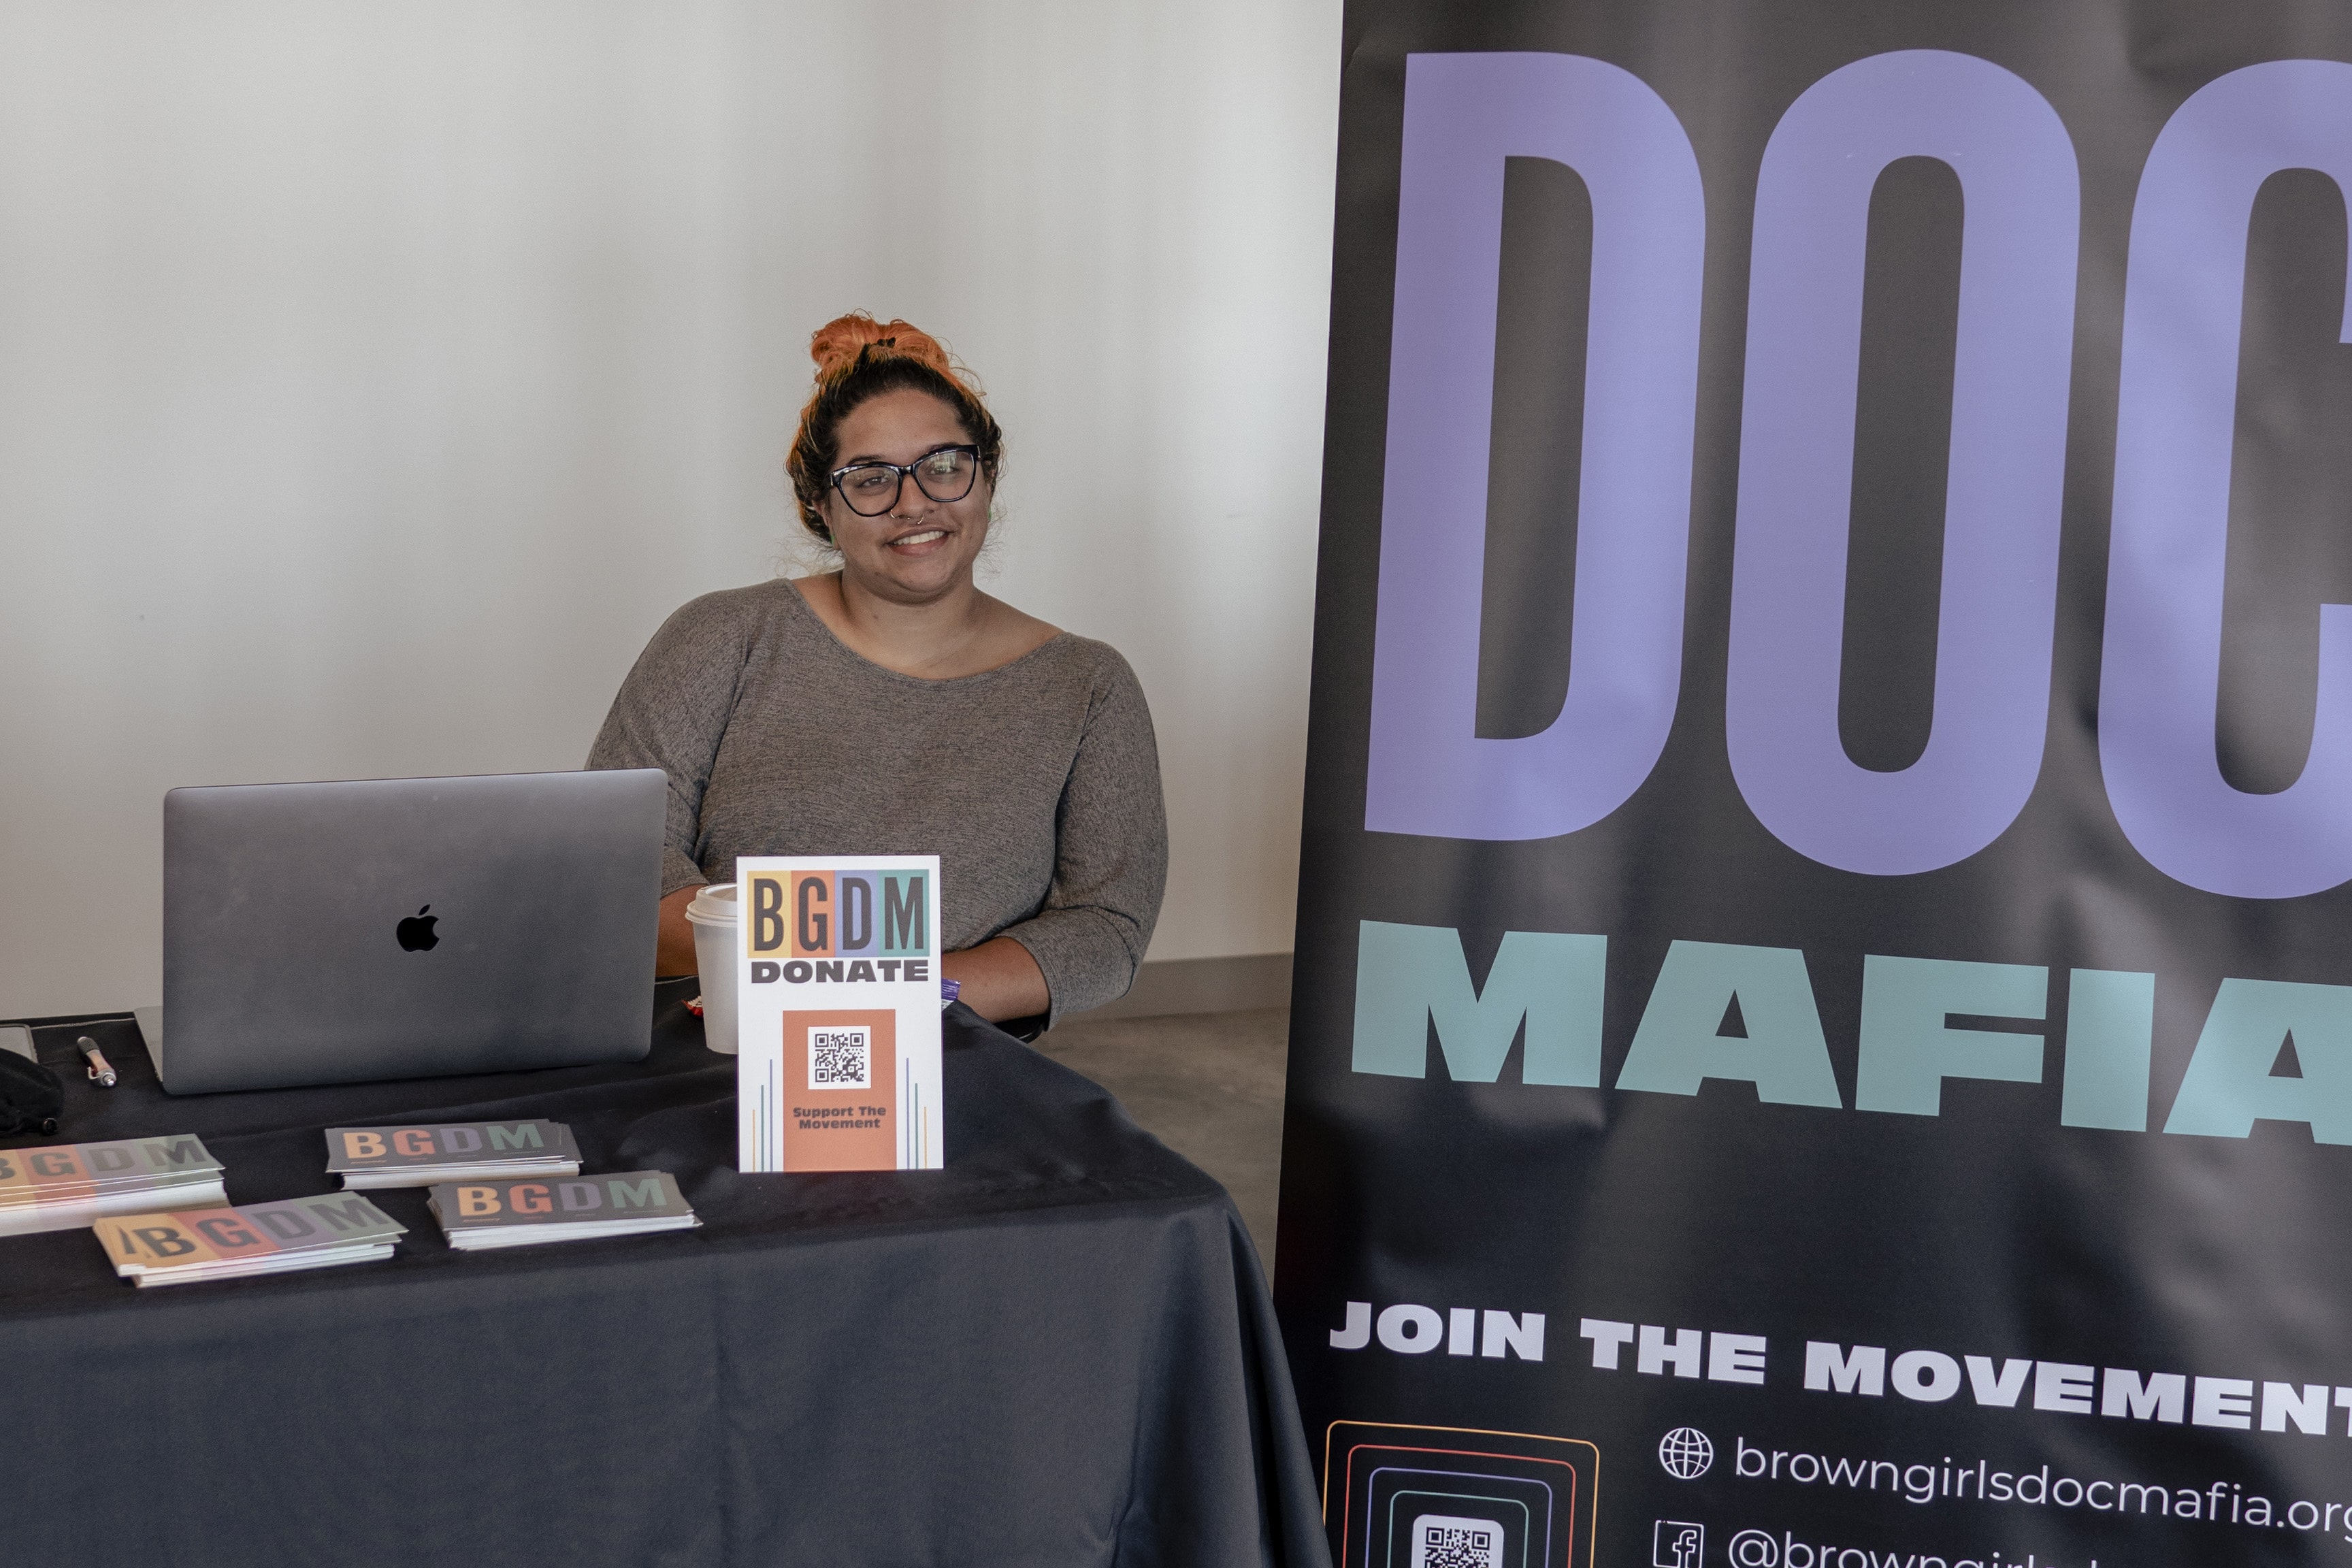 A woman of color with orange hair in a bun sits at a table with a black tablecloth and postcards that say BGDM, next to a large 